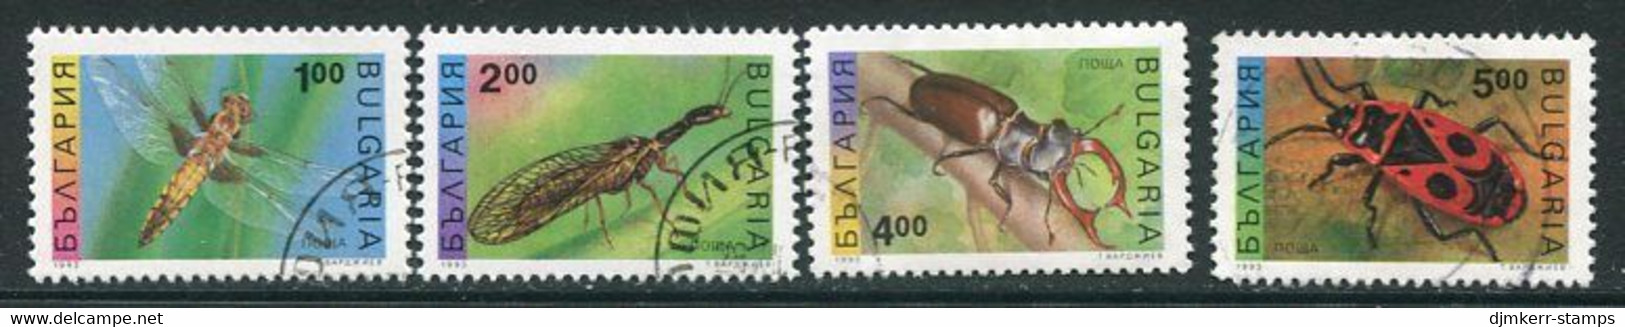 BULGARIA  1993 Defibitive: Insects Used.  Michel 4093-96 - Oblitérés